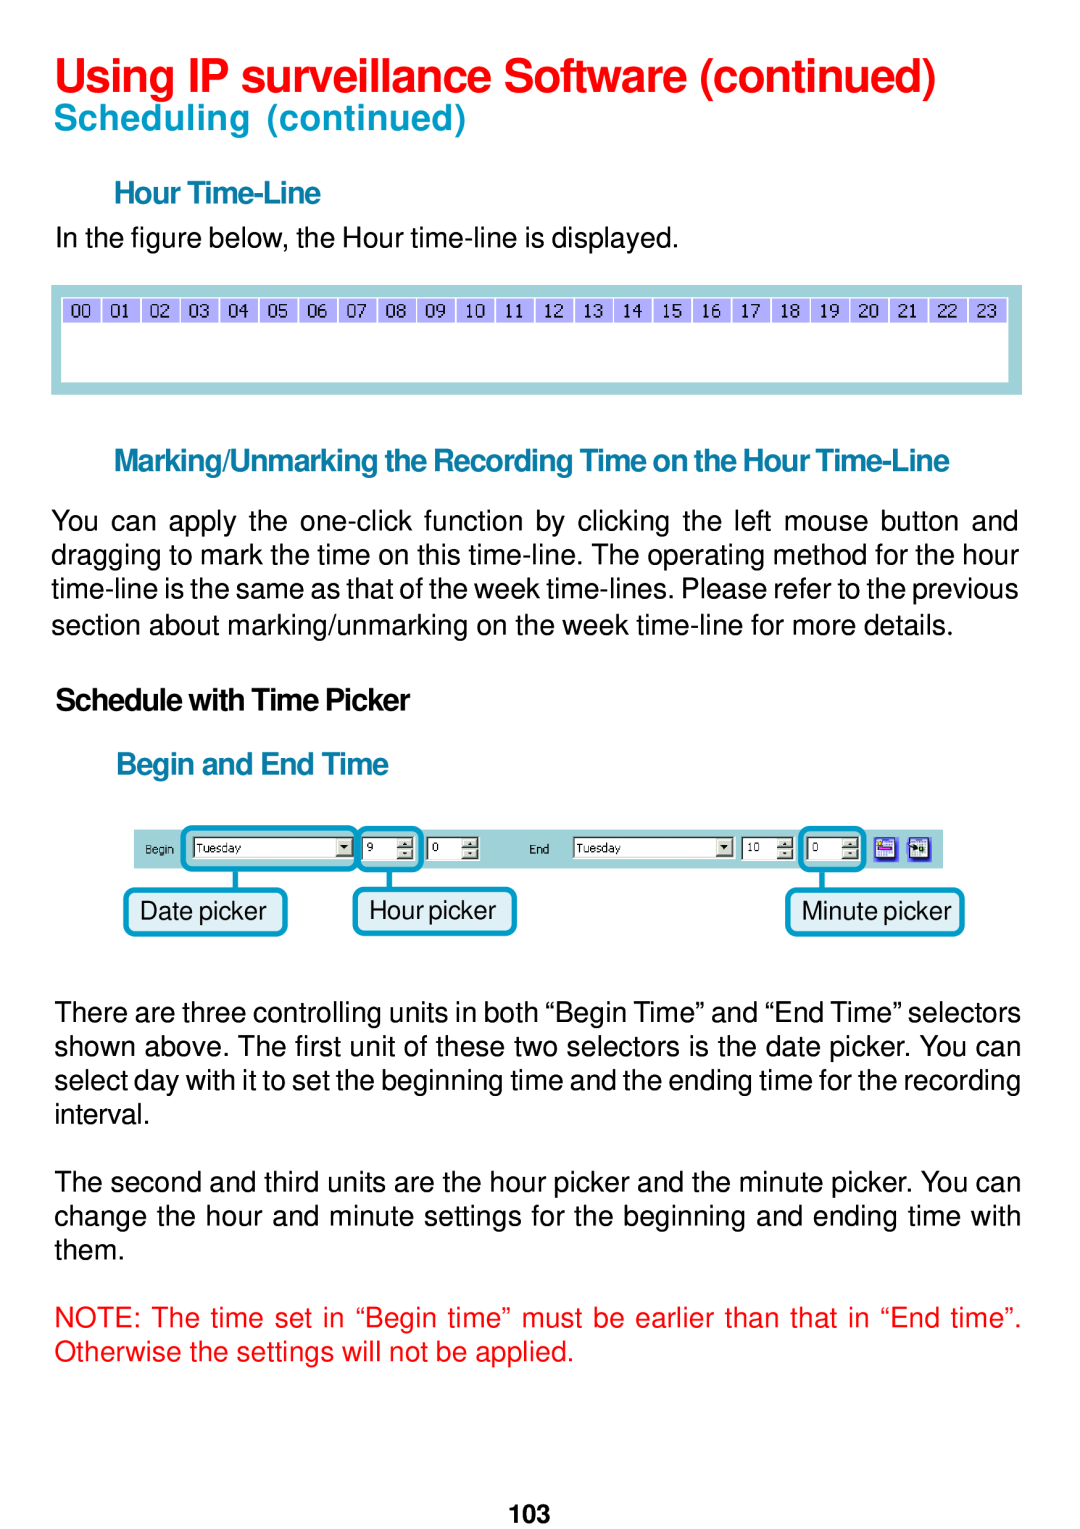 D-Link DCS-5300 manual Marking/Unmarking the Recording Time on the Hour Time-Line, Schedule with Time Picker 